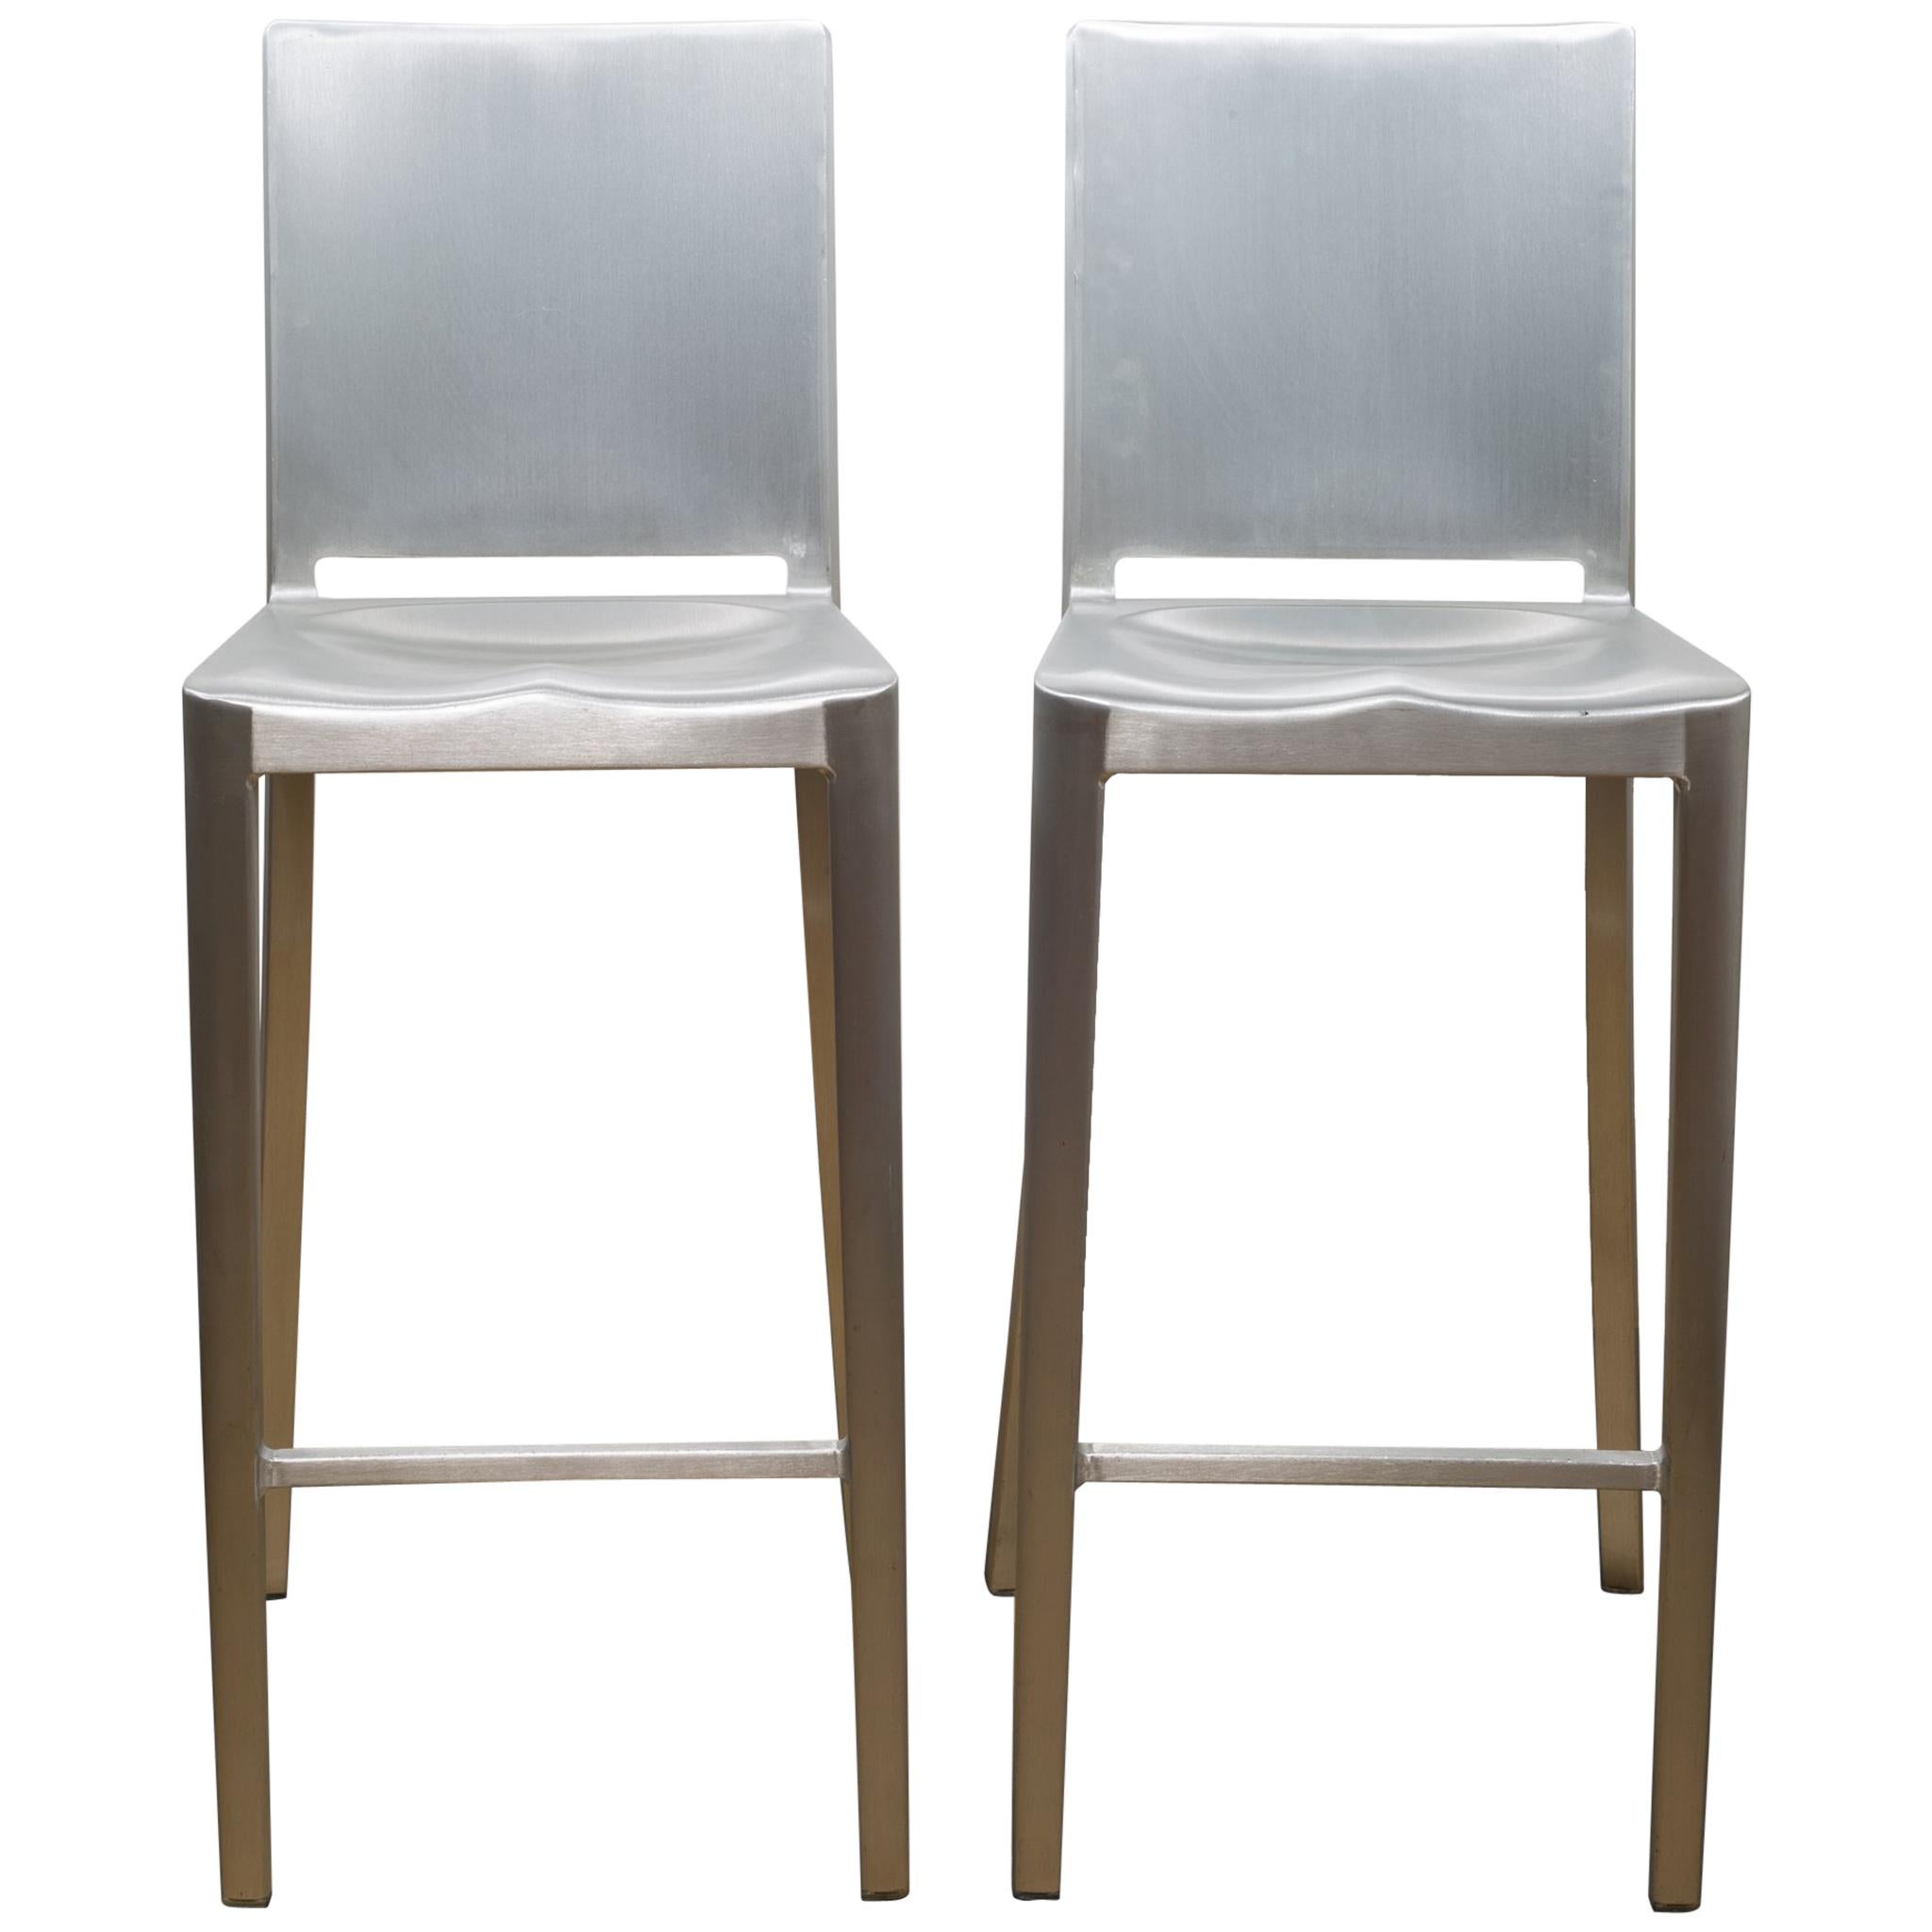 About

Two have sold. 

This is an original set of two brushed aluminum Emeco Hudson counter stools designed by Philippe Starck. The stools have retained their original finish and have the appropriate patina. Each stool has some blemishes. More